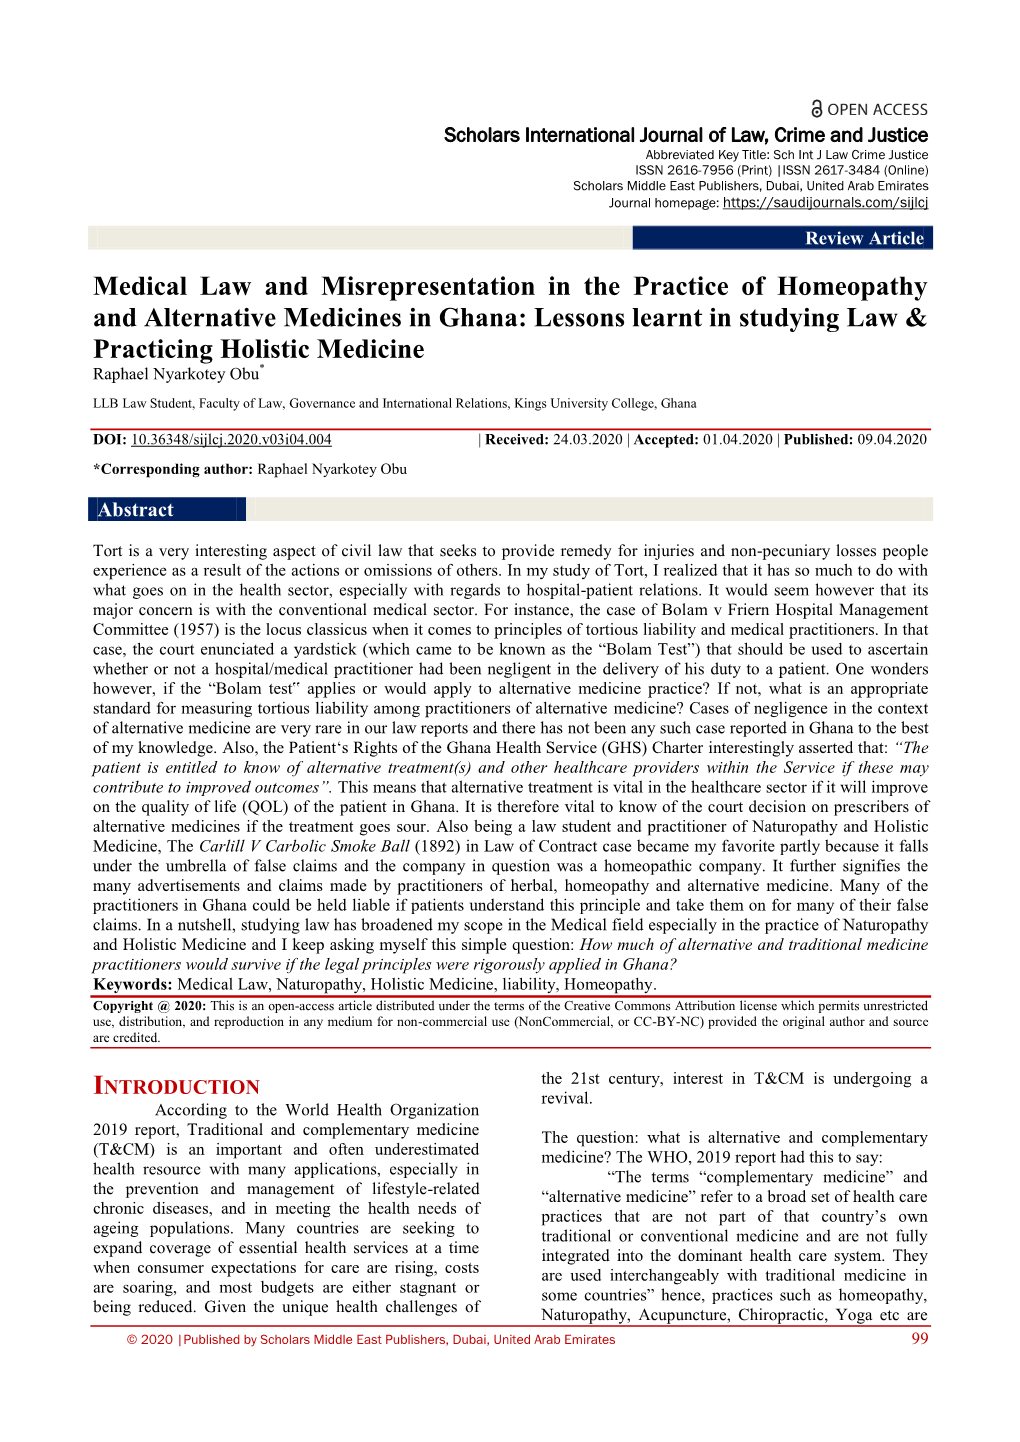 Medical Law and Misrepresentation In